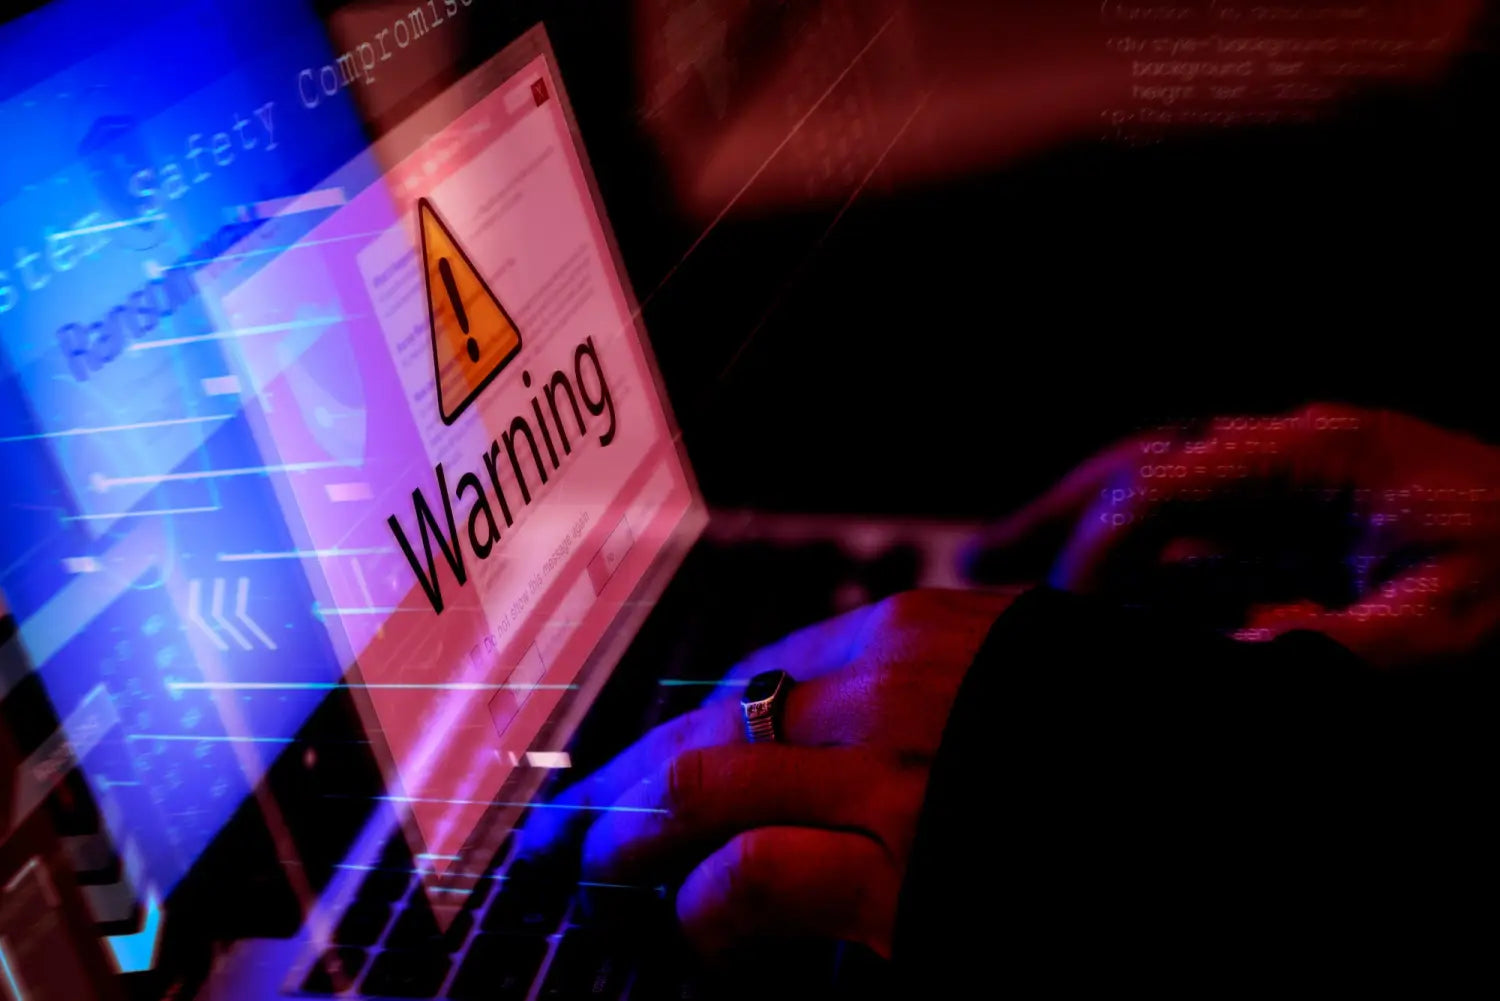 Malware: what is is and how to prevent it